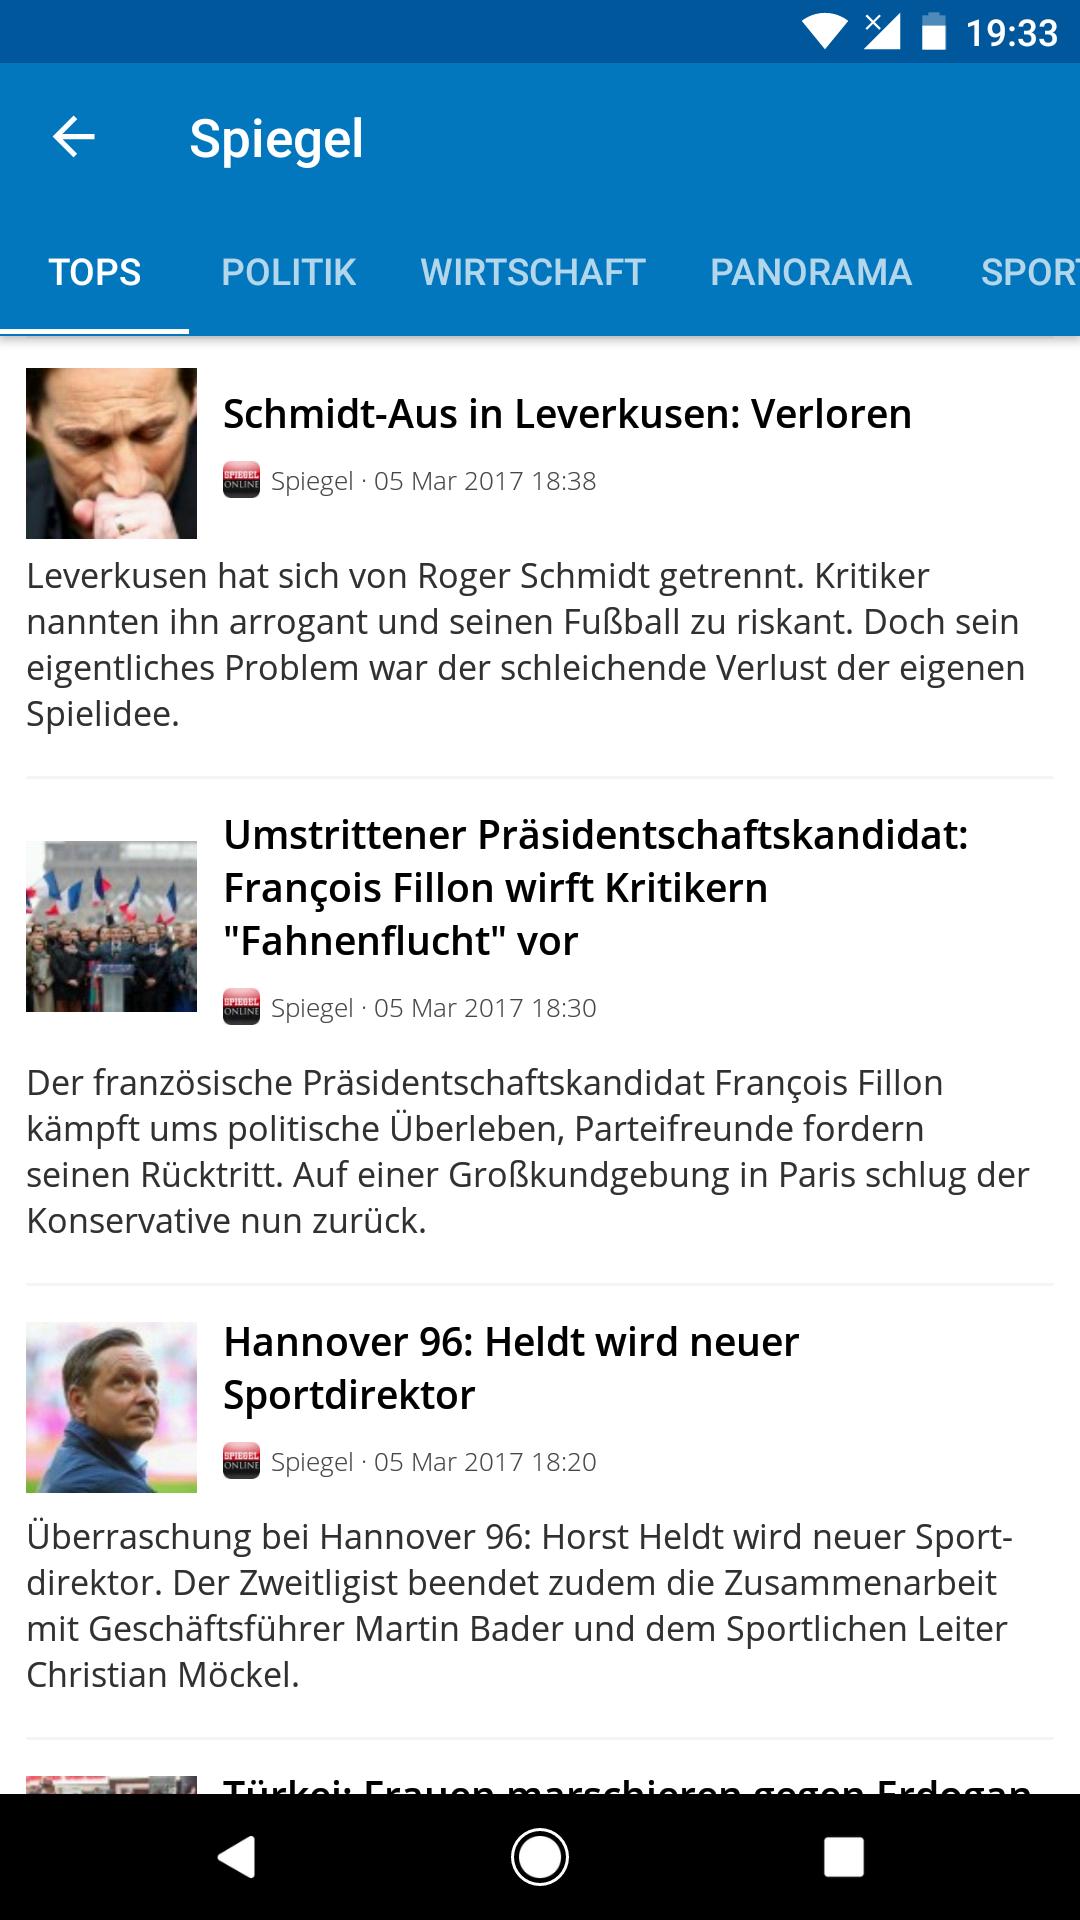 Switzerland News - Latest News for Android - APK Download